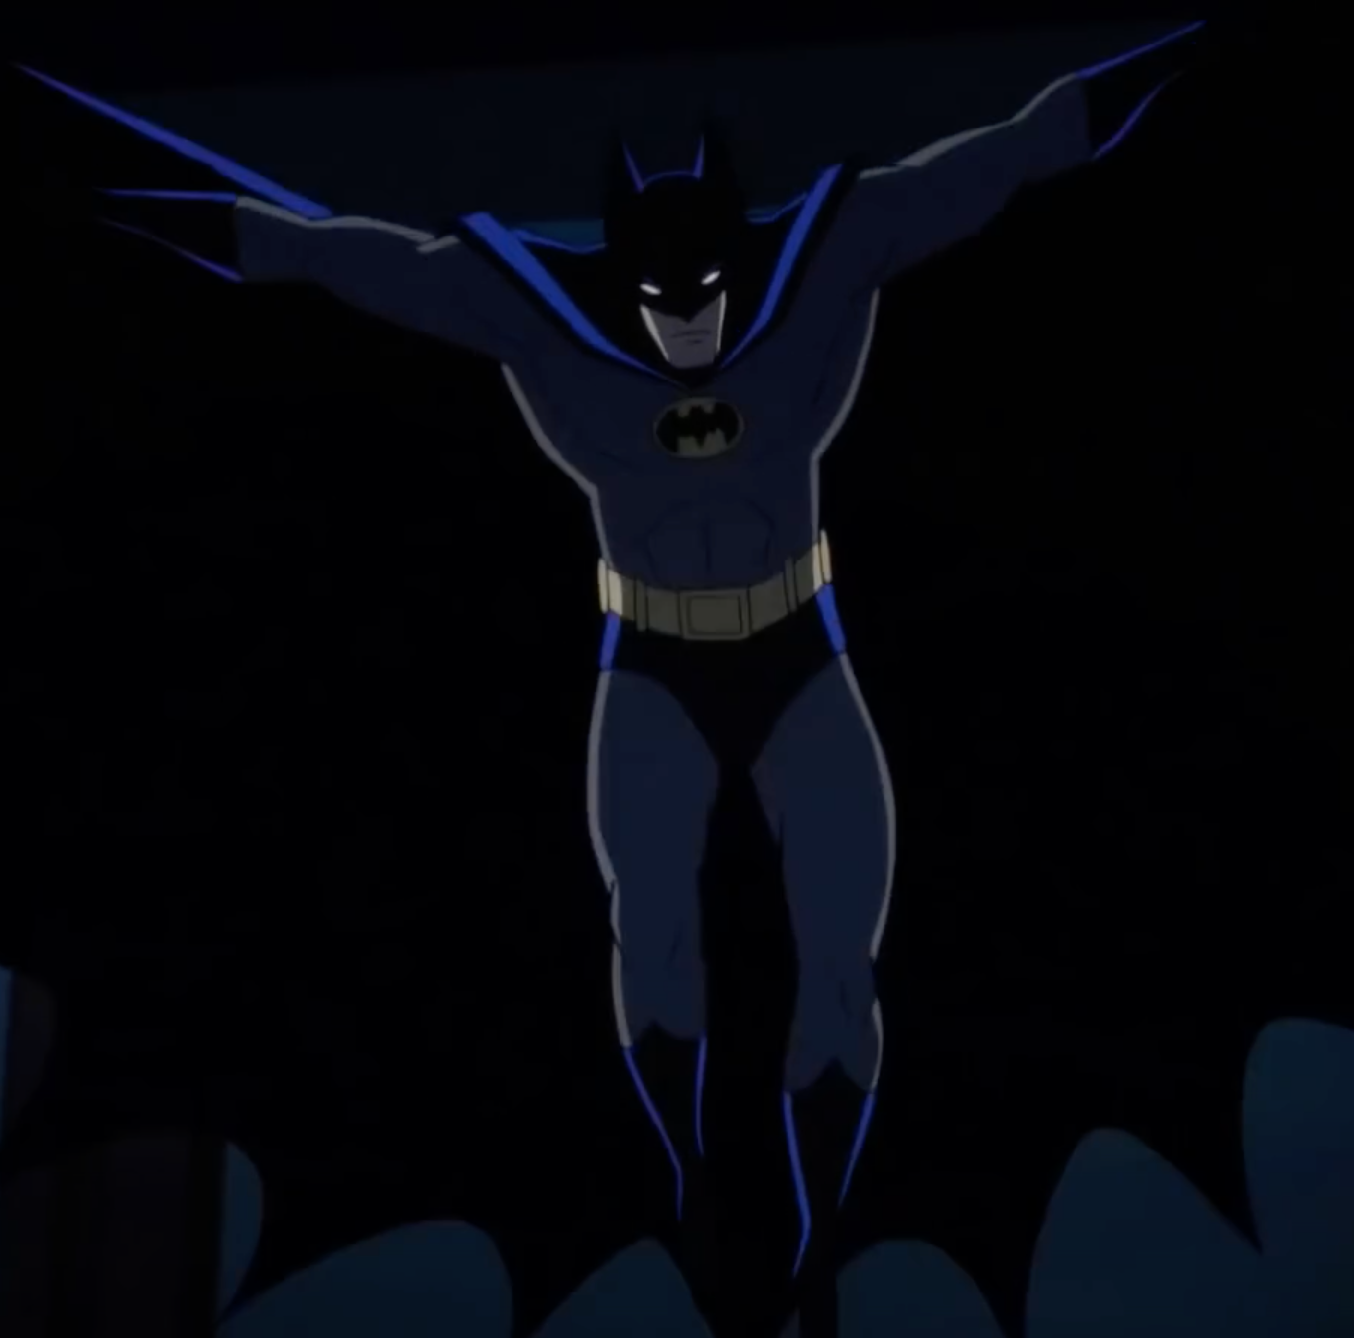 Dc Releases Trailer For Upcomin R Rated Animated Movie Batman Soul Of The Dragon - Mxdwn Movies